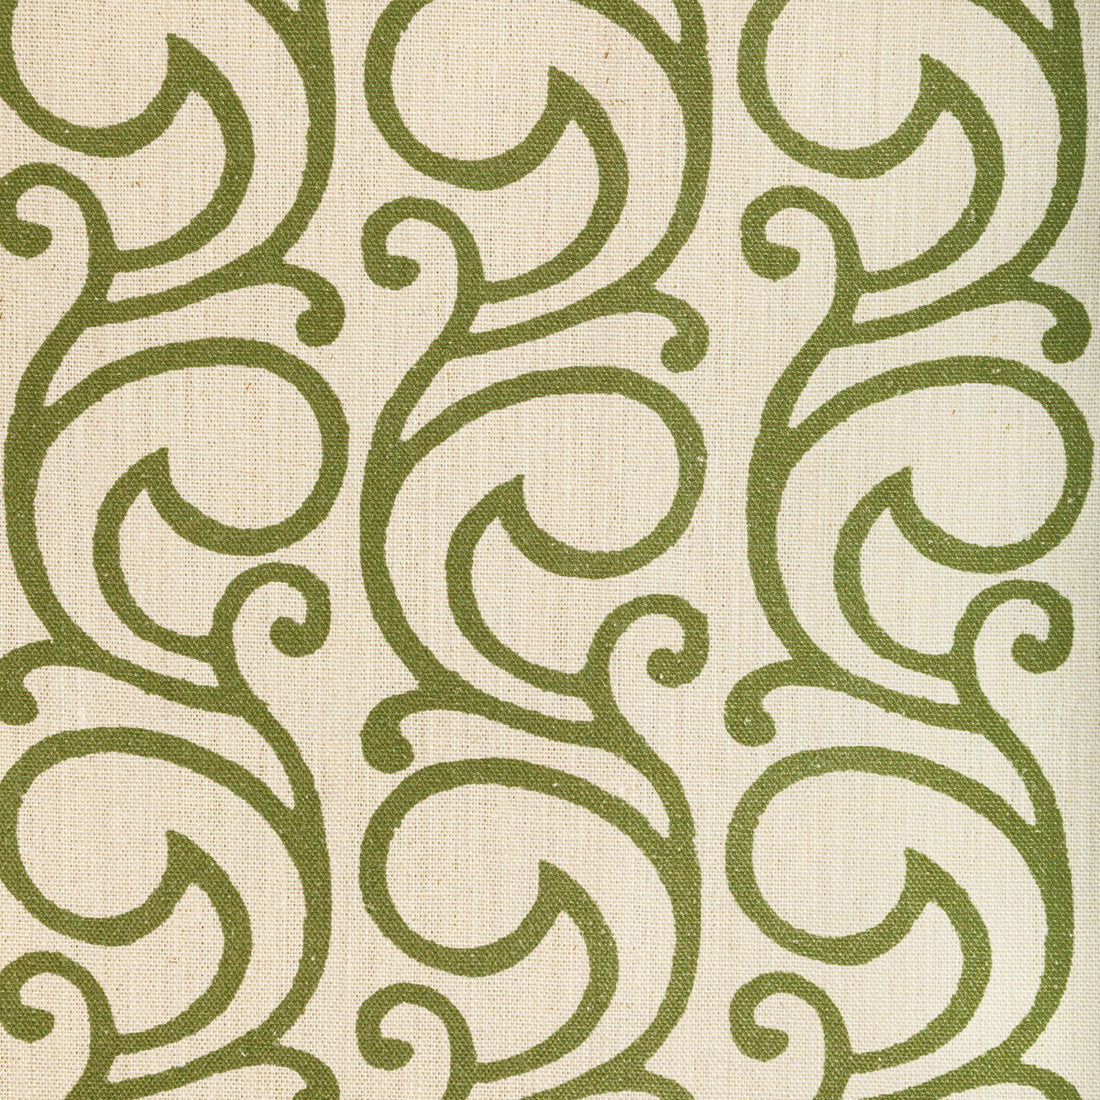 Serendipity Scroll fabric in ivy color - pattern 2022103.30.0 - by Lee Jofa in the Sarah Bartholomew collection